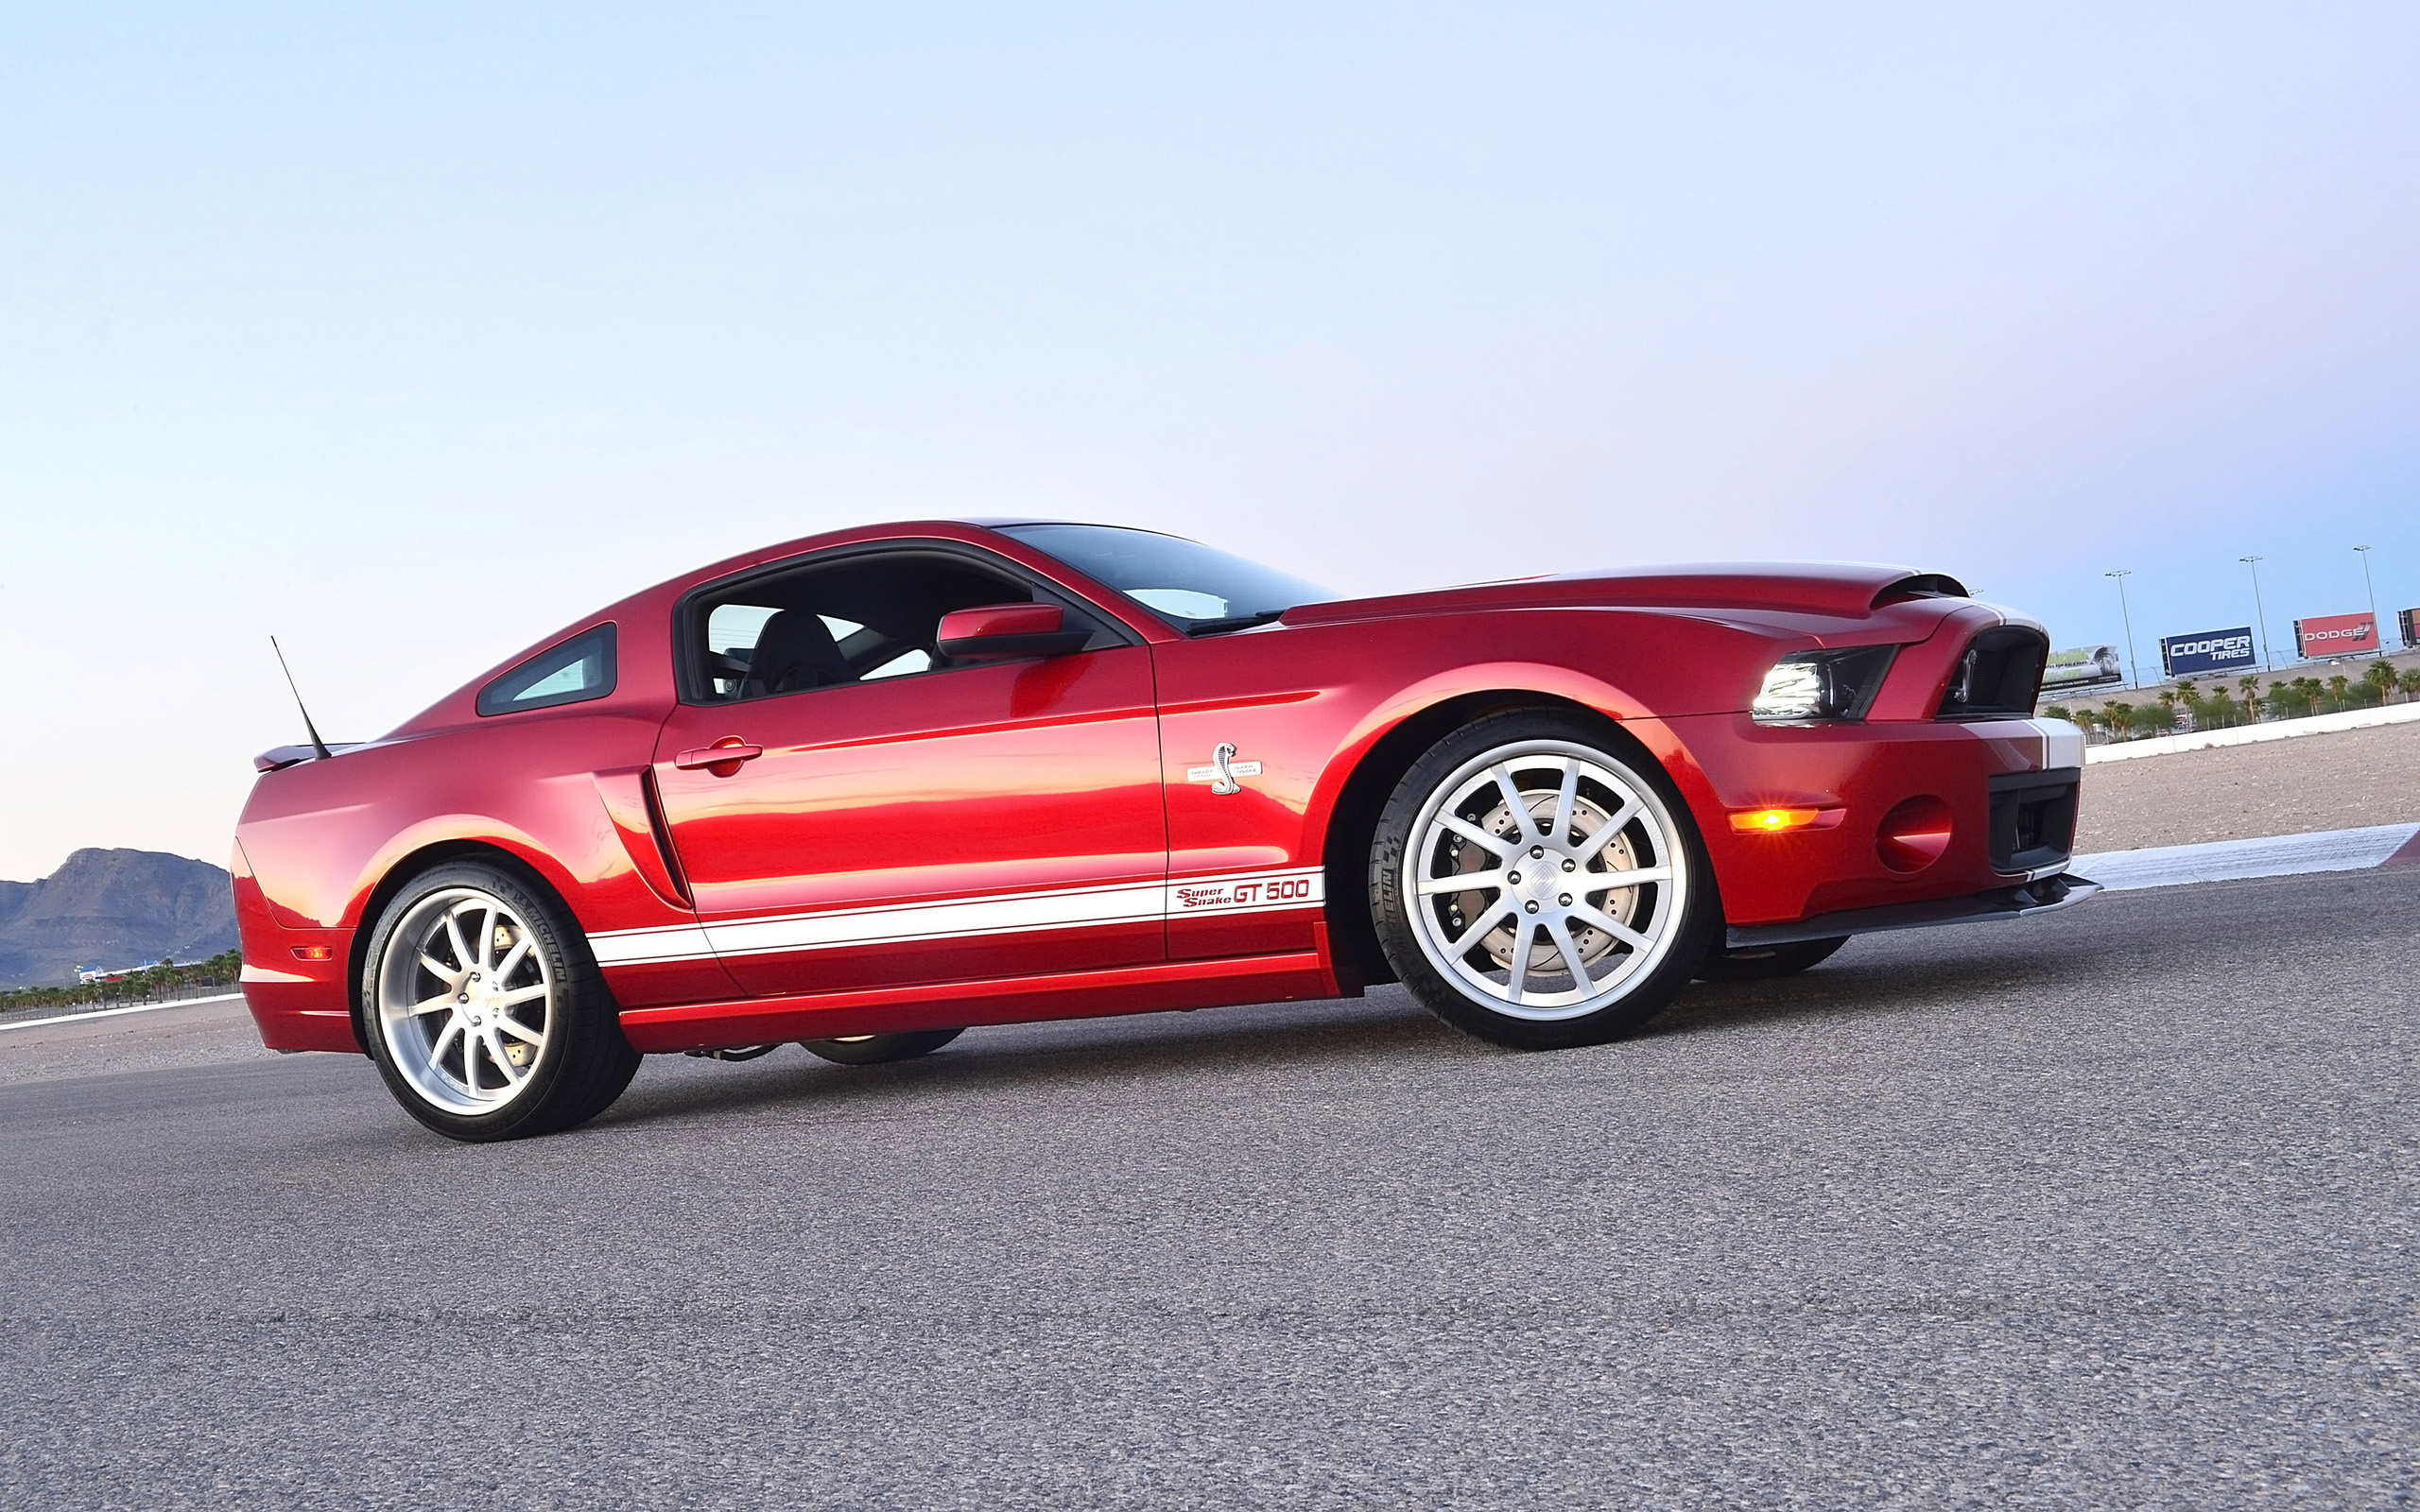 2013, Shelby, Gt500, Super, Snake, Muscle, Supercar, Ford, Mustang, Jq Wallpaper